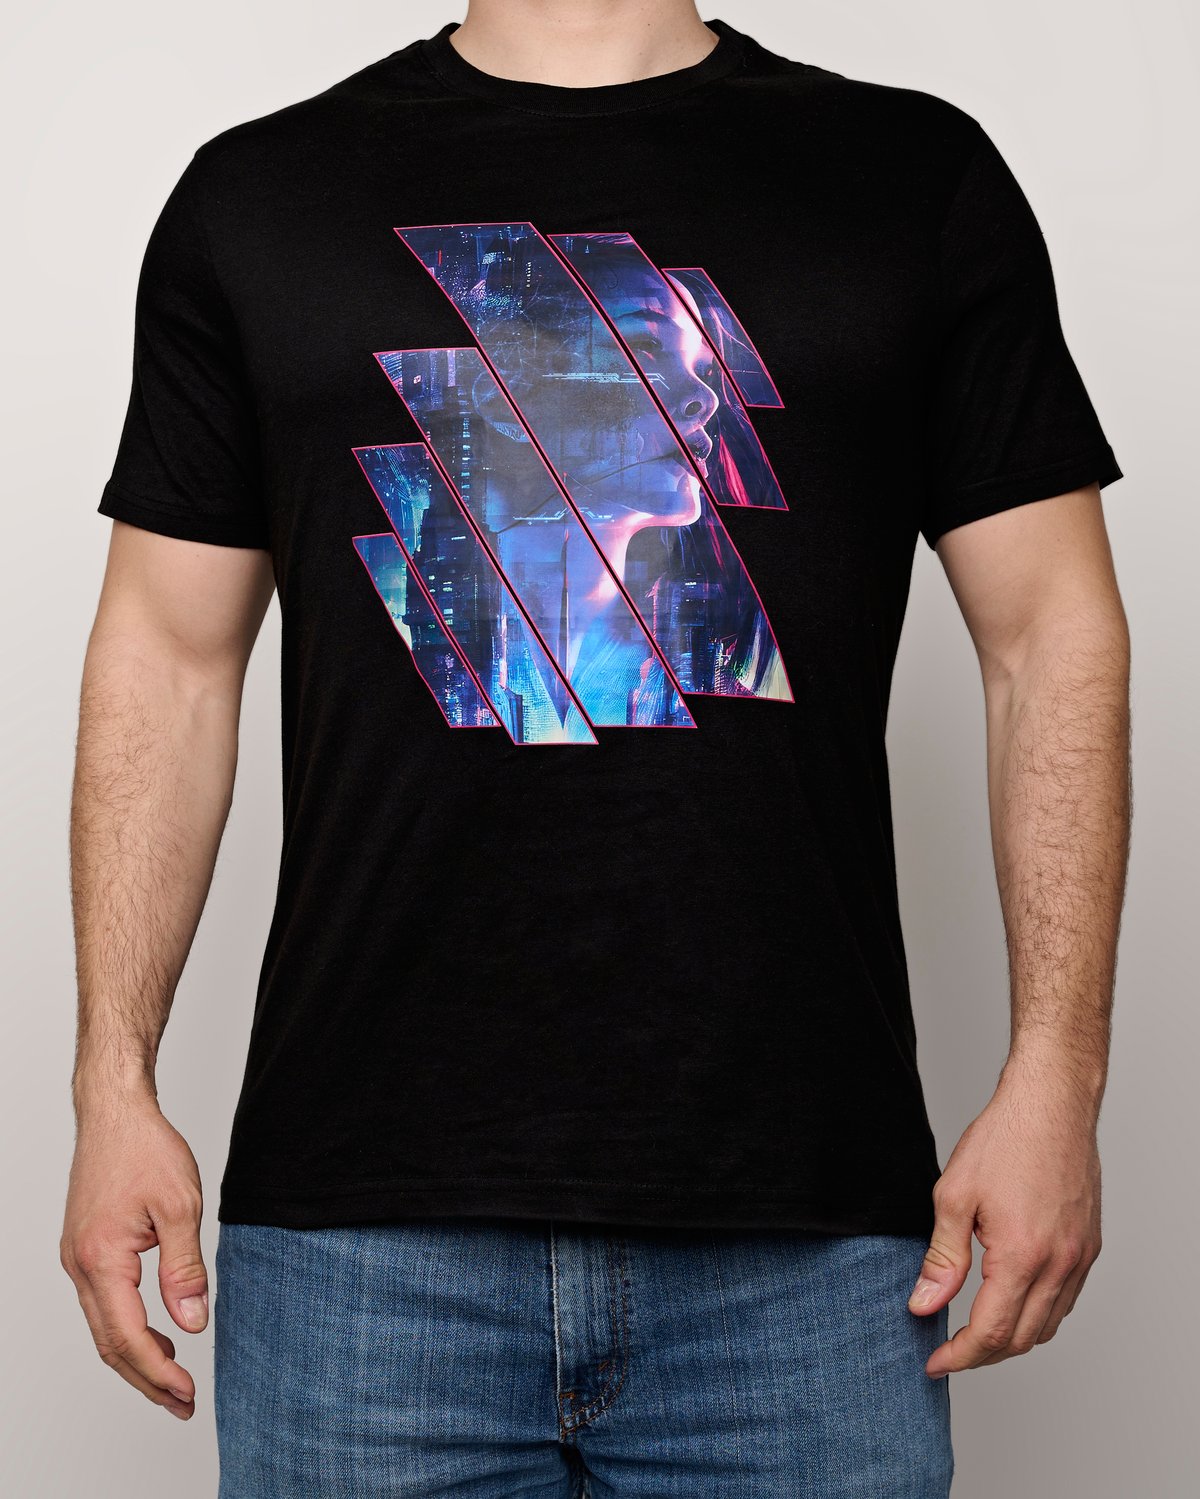 Image of "Architecture Of An Ego" man T-shirt